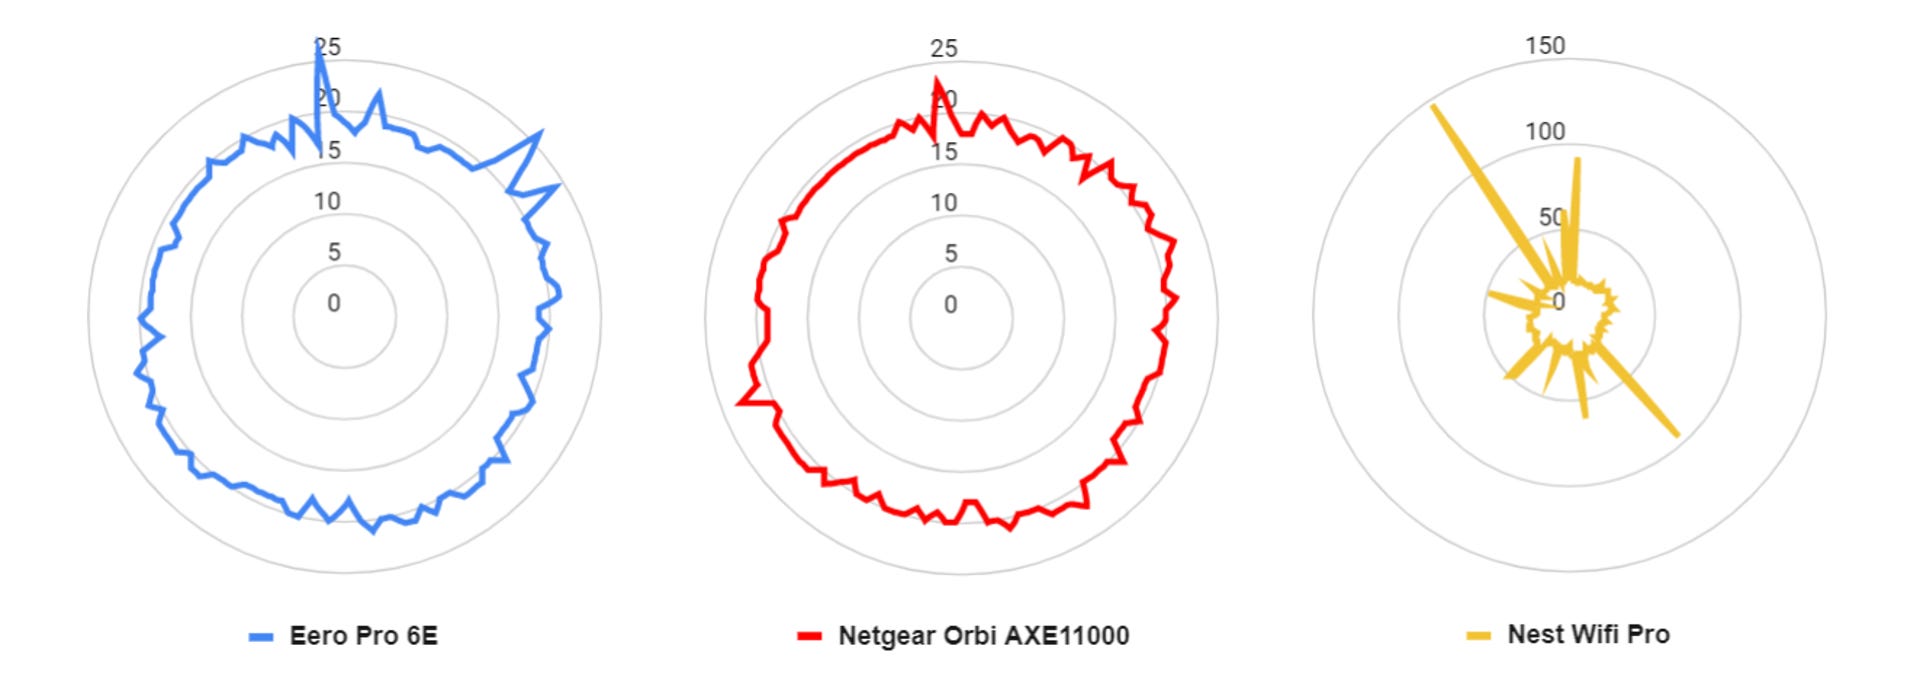 A trio of radar graphs shows the latency results across hundreds of speed tests to the same server on the same days for three mesh routers: the Eero Pro 6E, the Netgear Orbi AXE11000, and the Nest Wifi Pro. The Eero and Netgear systems held latency to roughly 20 milliseconds across all tests, save for a few occasional spikes to 25ms with each system. Meanwhile, Nest Wifi Pro saw regular spikes as high as 150ms, which means that latency was much higher than expected at several points during tests.